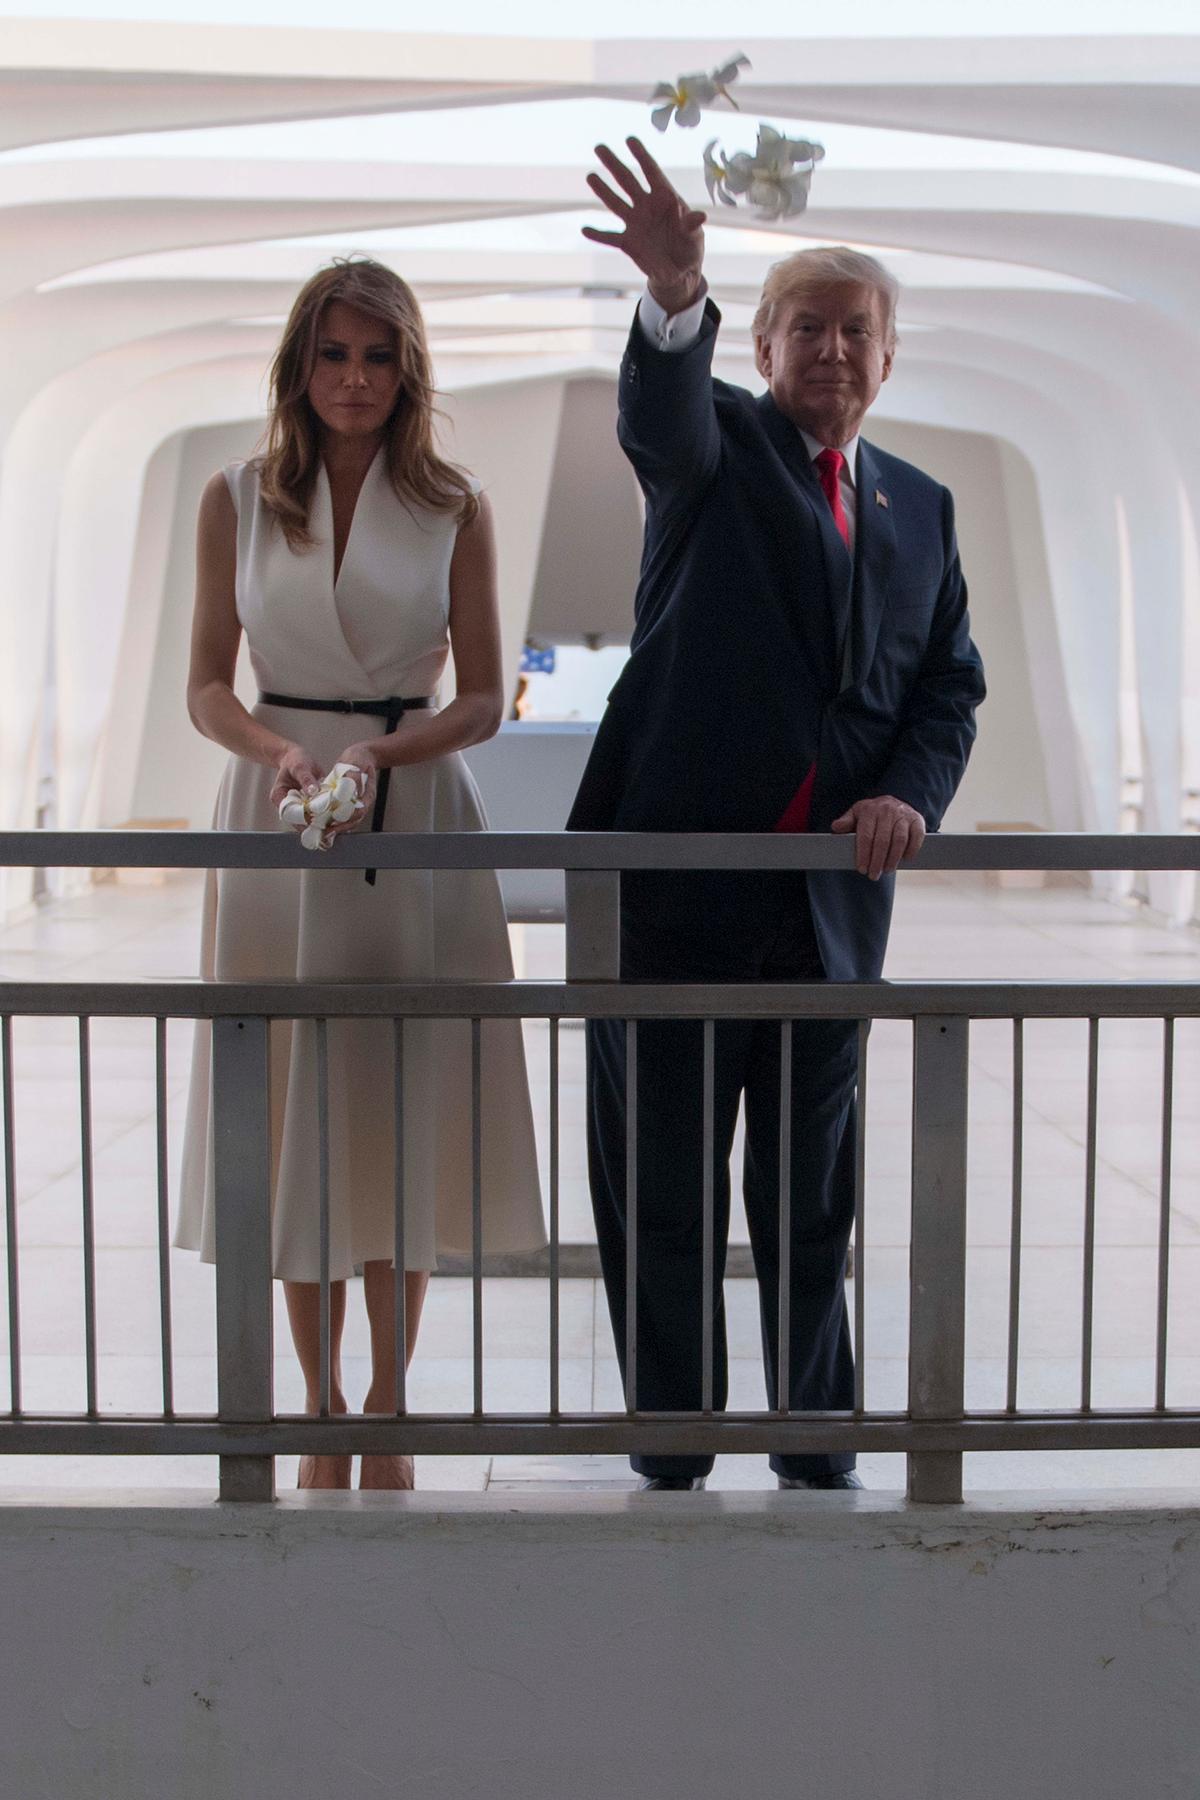 President Donald Trump and First Lady Melania Trump throw flowers during their visit to the USS Arizona Memorial on Nov. 3, 2017. (JIM WATSON/AFP/Getty Images)